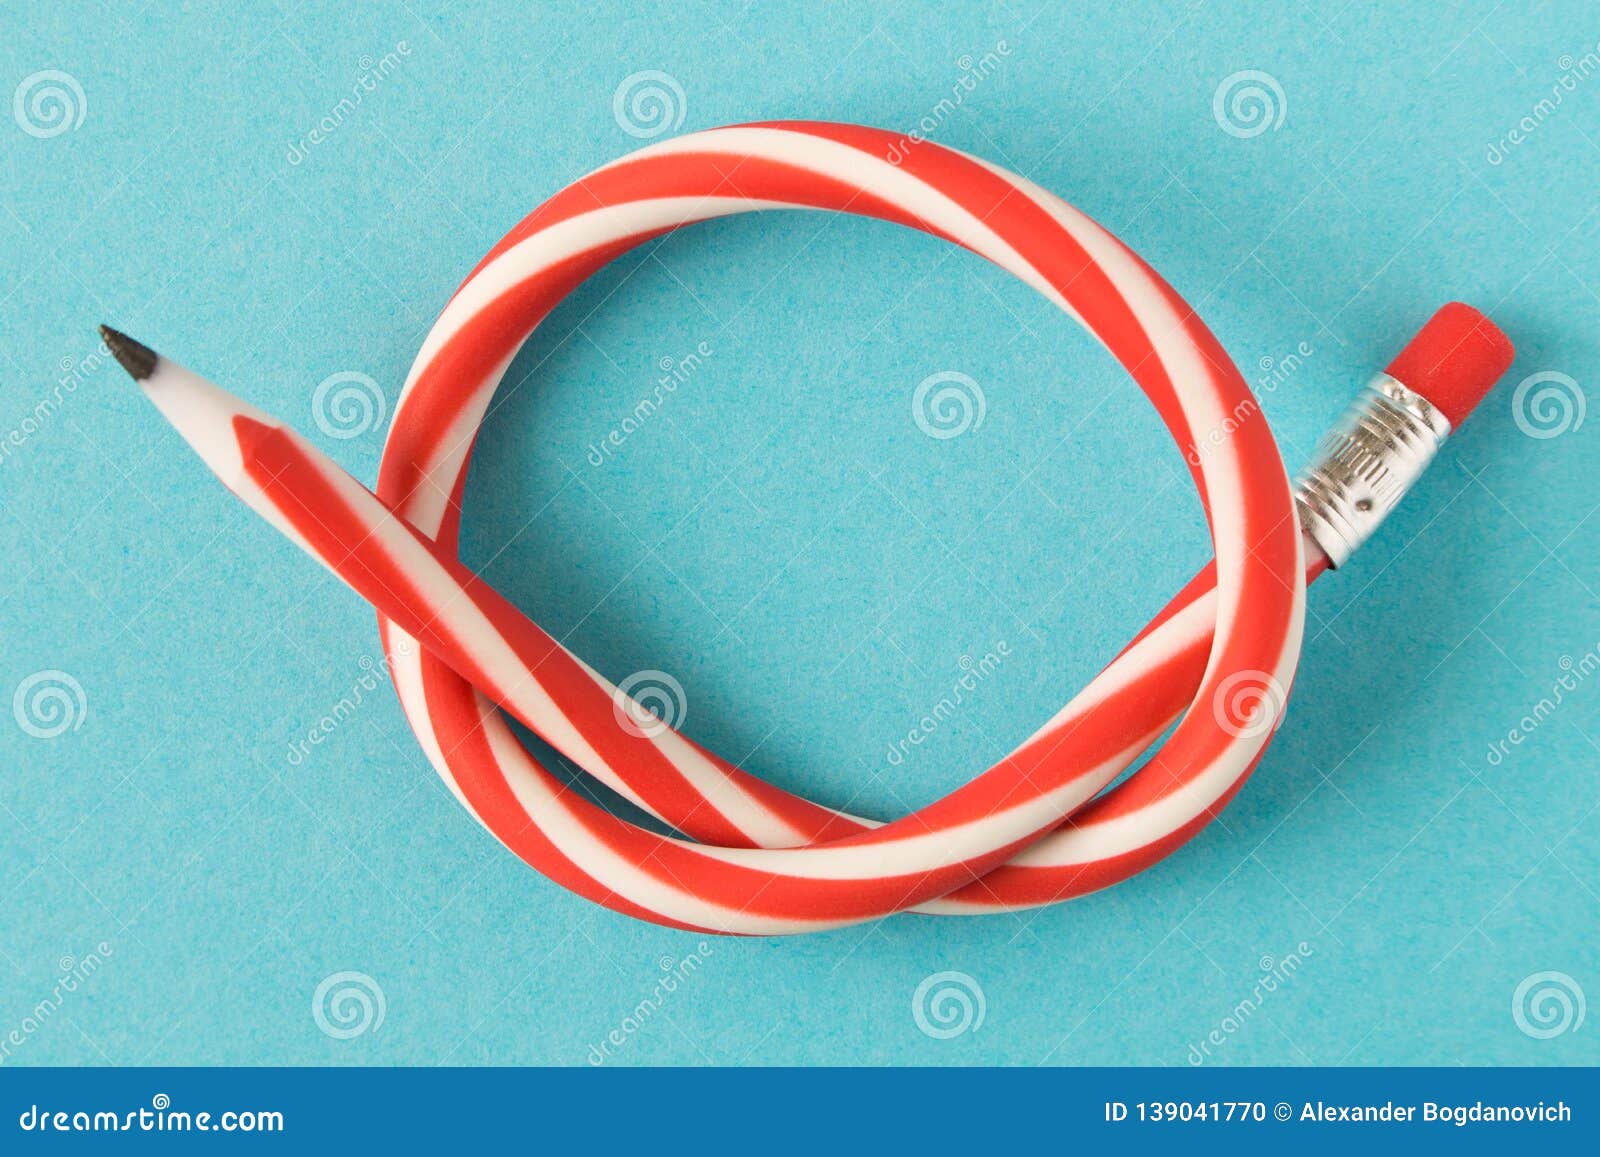 Flexible Pencil . on Blue Background Stock Photo - Image of paint ...